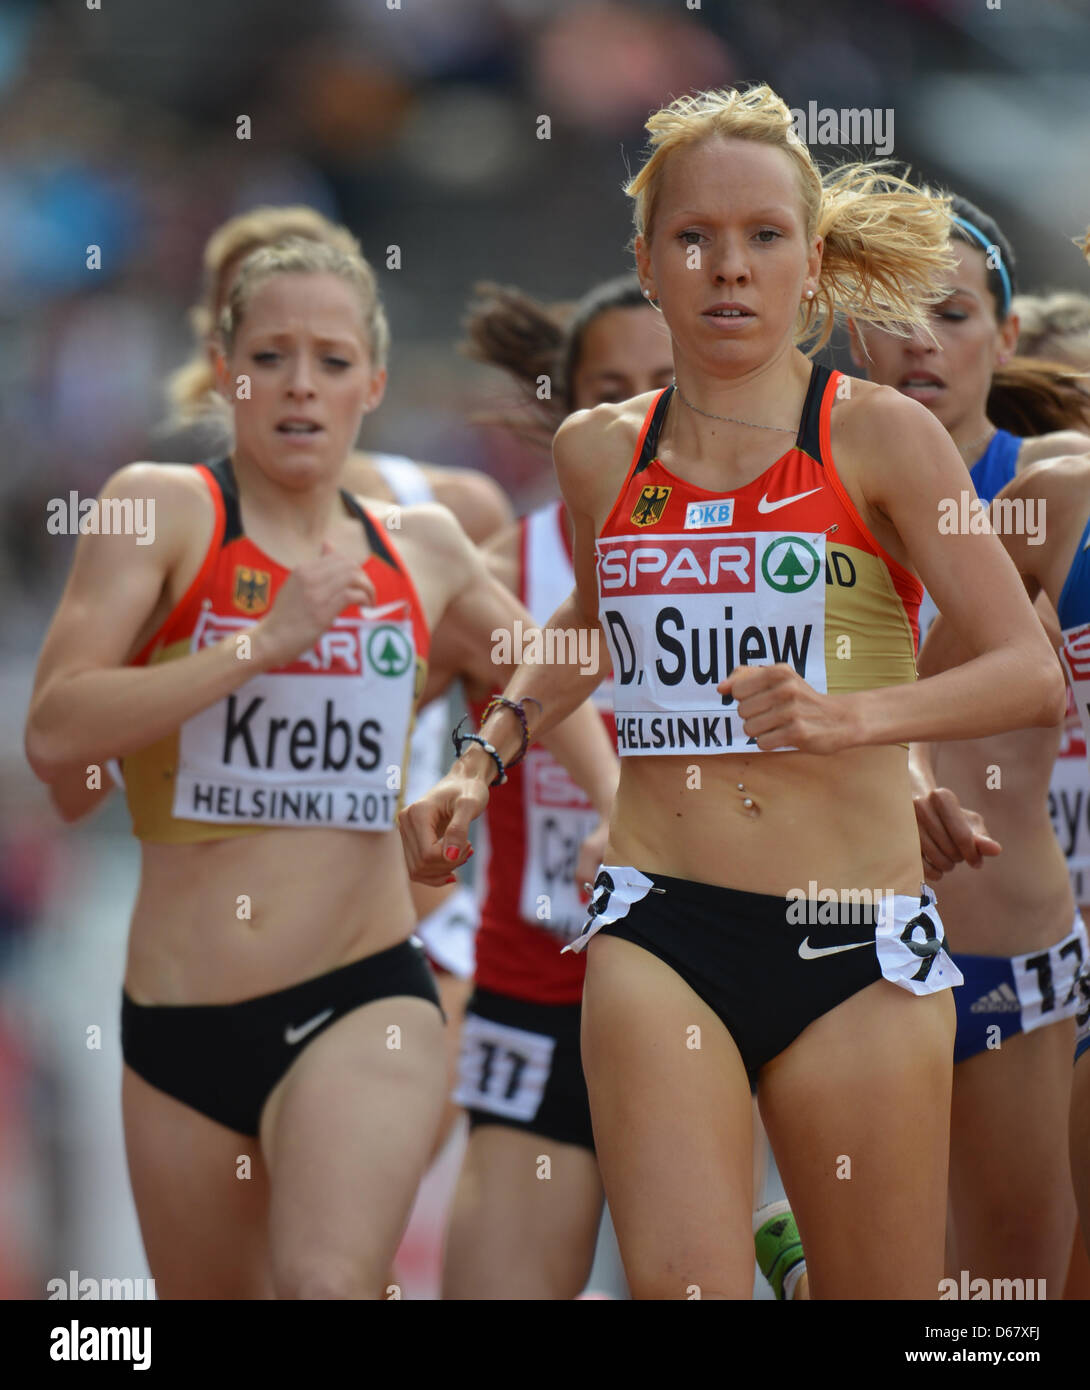 Denise Krebs (L) and Diana Sujew of Germany competes during the womens 1500 M semifinal at the European Athletics Championships 2012 at Olympic Stadium in Helsinki, Finland, 30 June 2012. The European Athletics Championships take place in Helsinki from the 27 June to 01 July 2012. Photo: Bernd Thissen dpa  +++(c) dpa - Bildfunk+++ Stock Photo